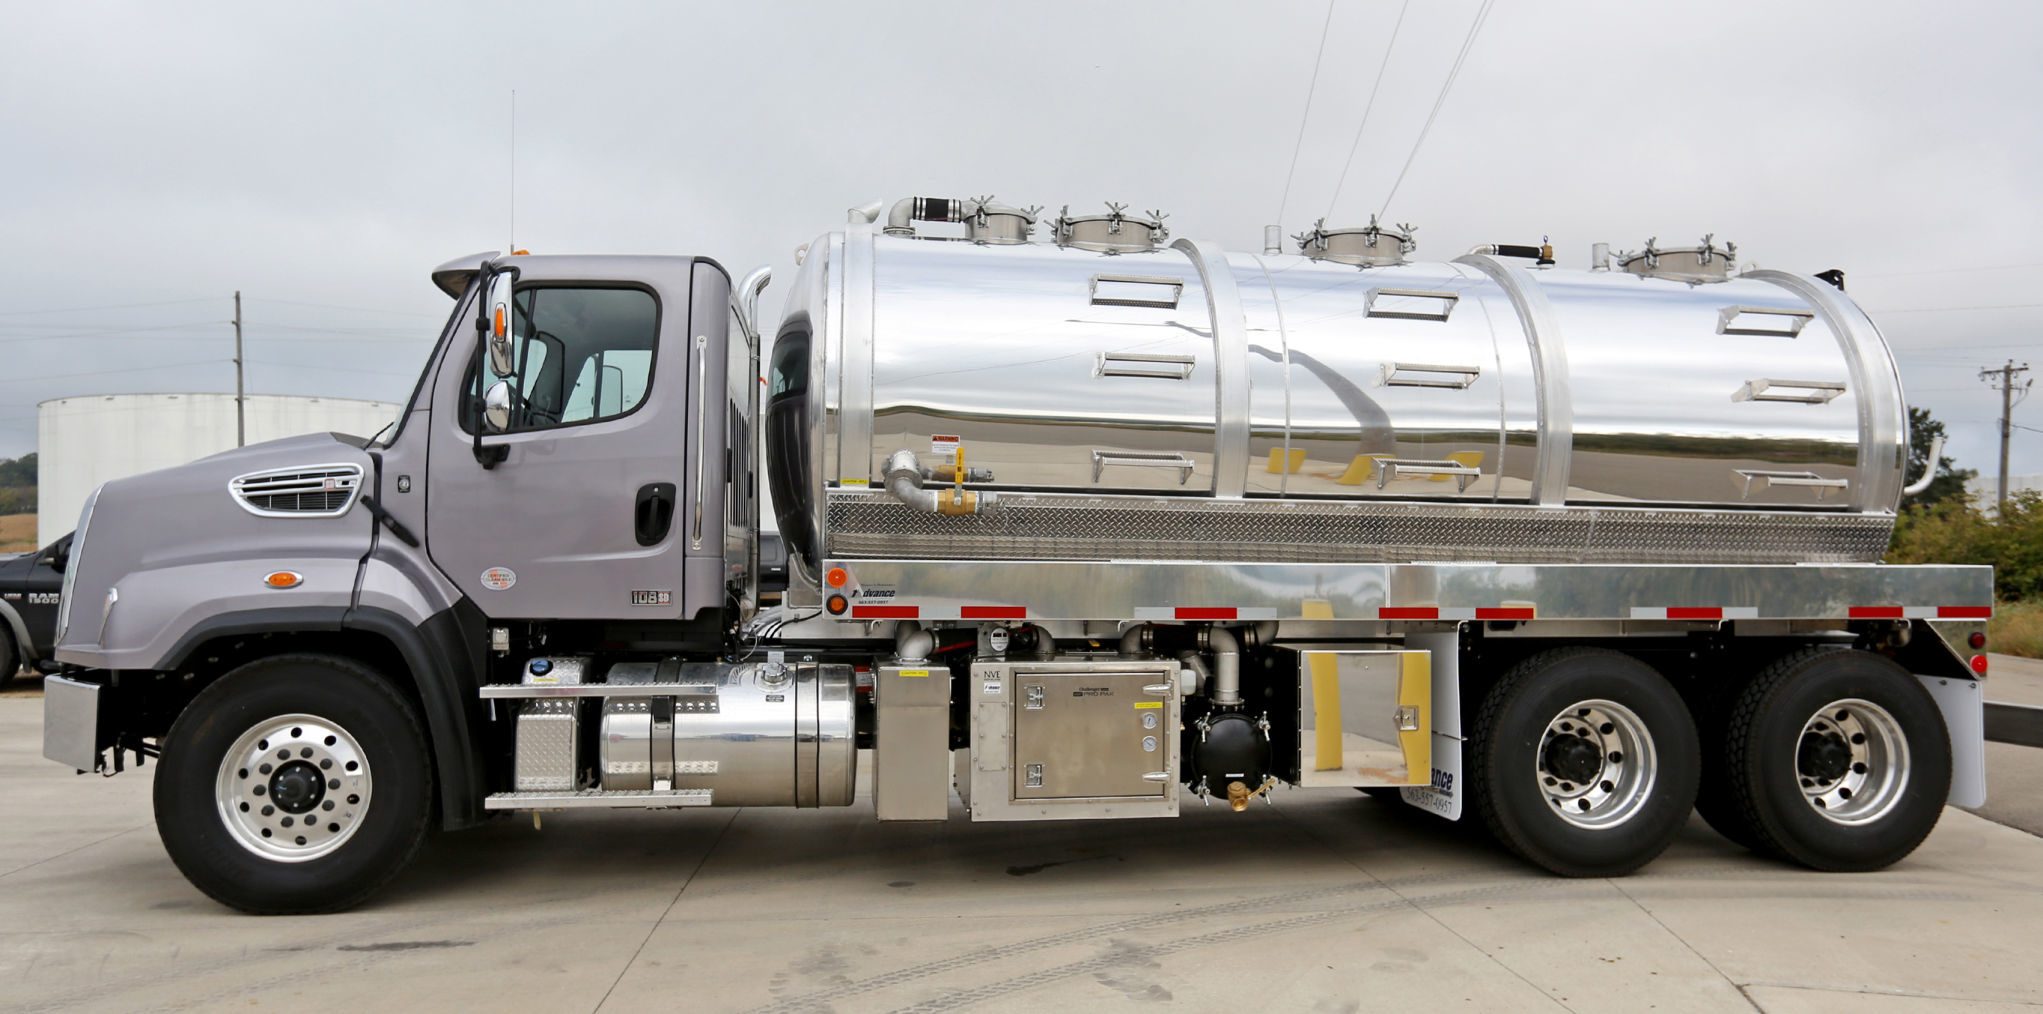 A 4,200 gallon aluminum truck-mounted vacuum tank, specifically designed for transporting grease fats and oils, sits ready at Advance Pump & Equipment Inc. in Peosta, Iowa.    PHOTO CREDIT: Jessica Reilly